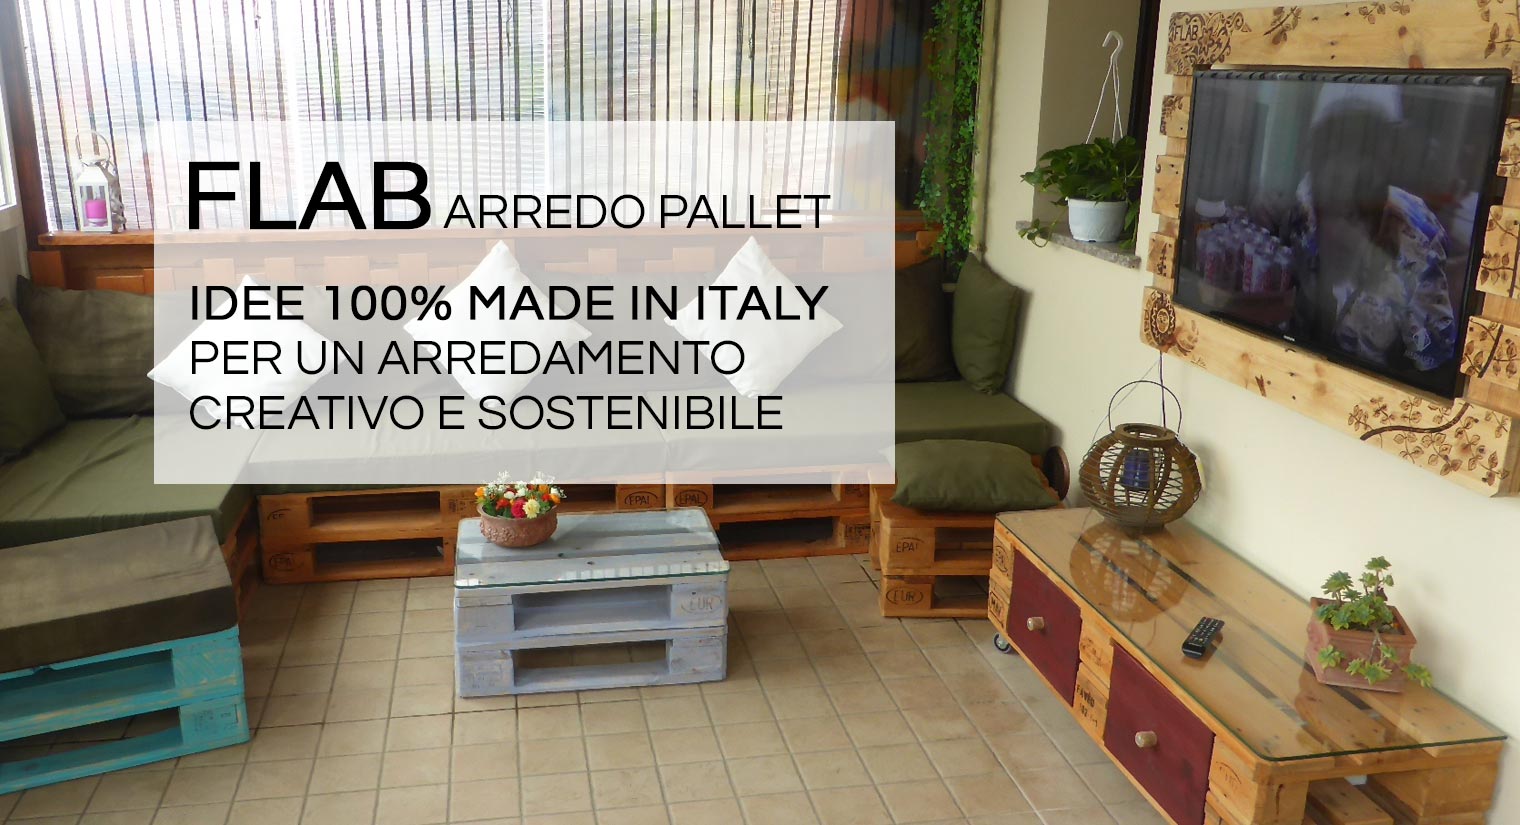 Arredamento in pallet made in italy